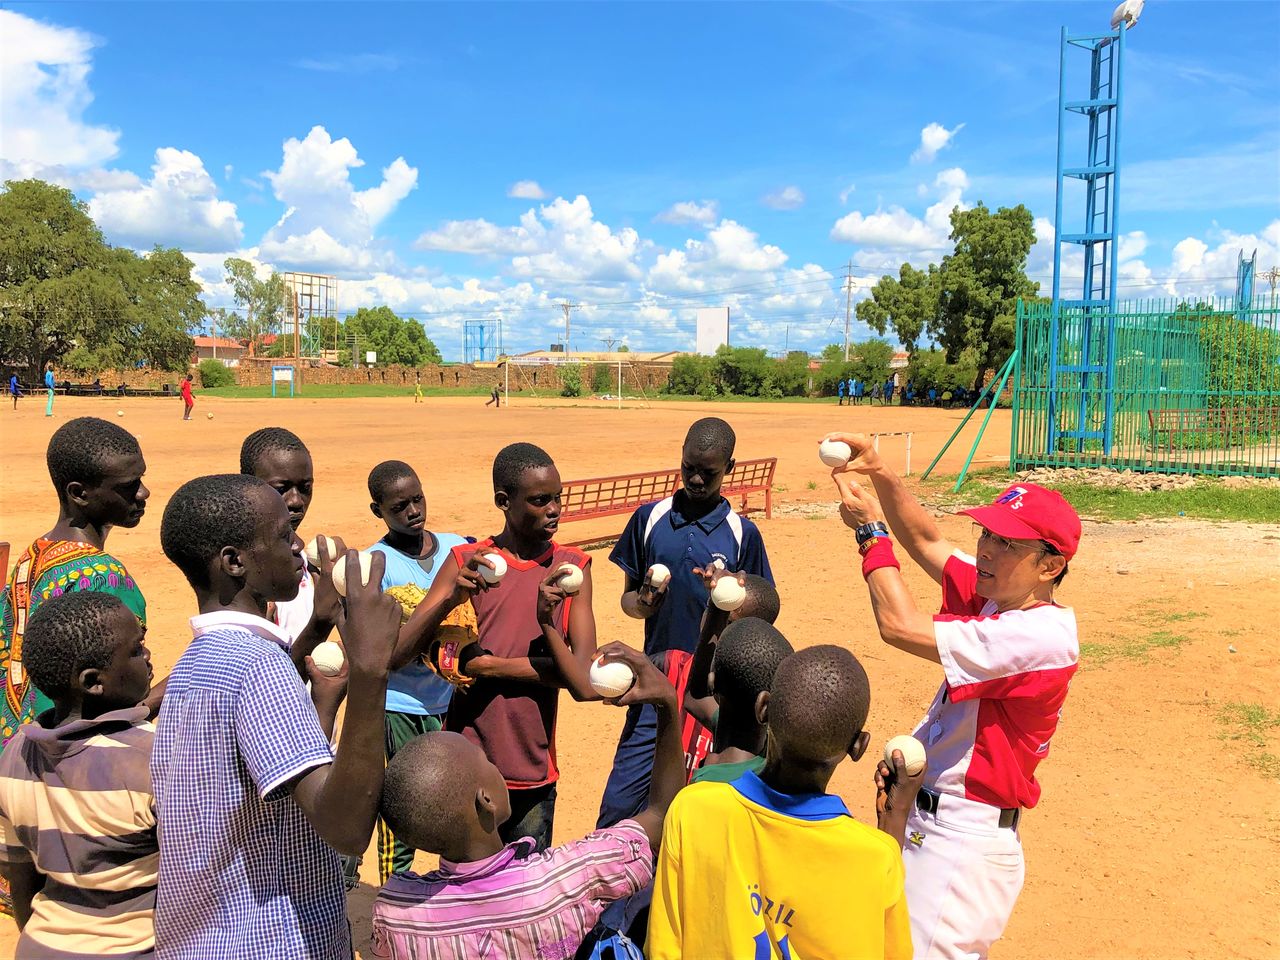 Playing with rubber balls, usually the first type of balls children encounter in South Sudan.  (Courtesy of Tomonari Shin'ya)